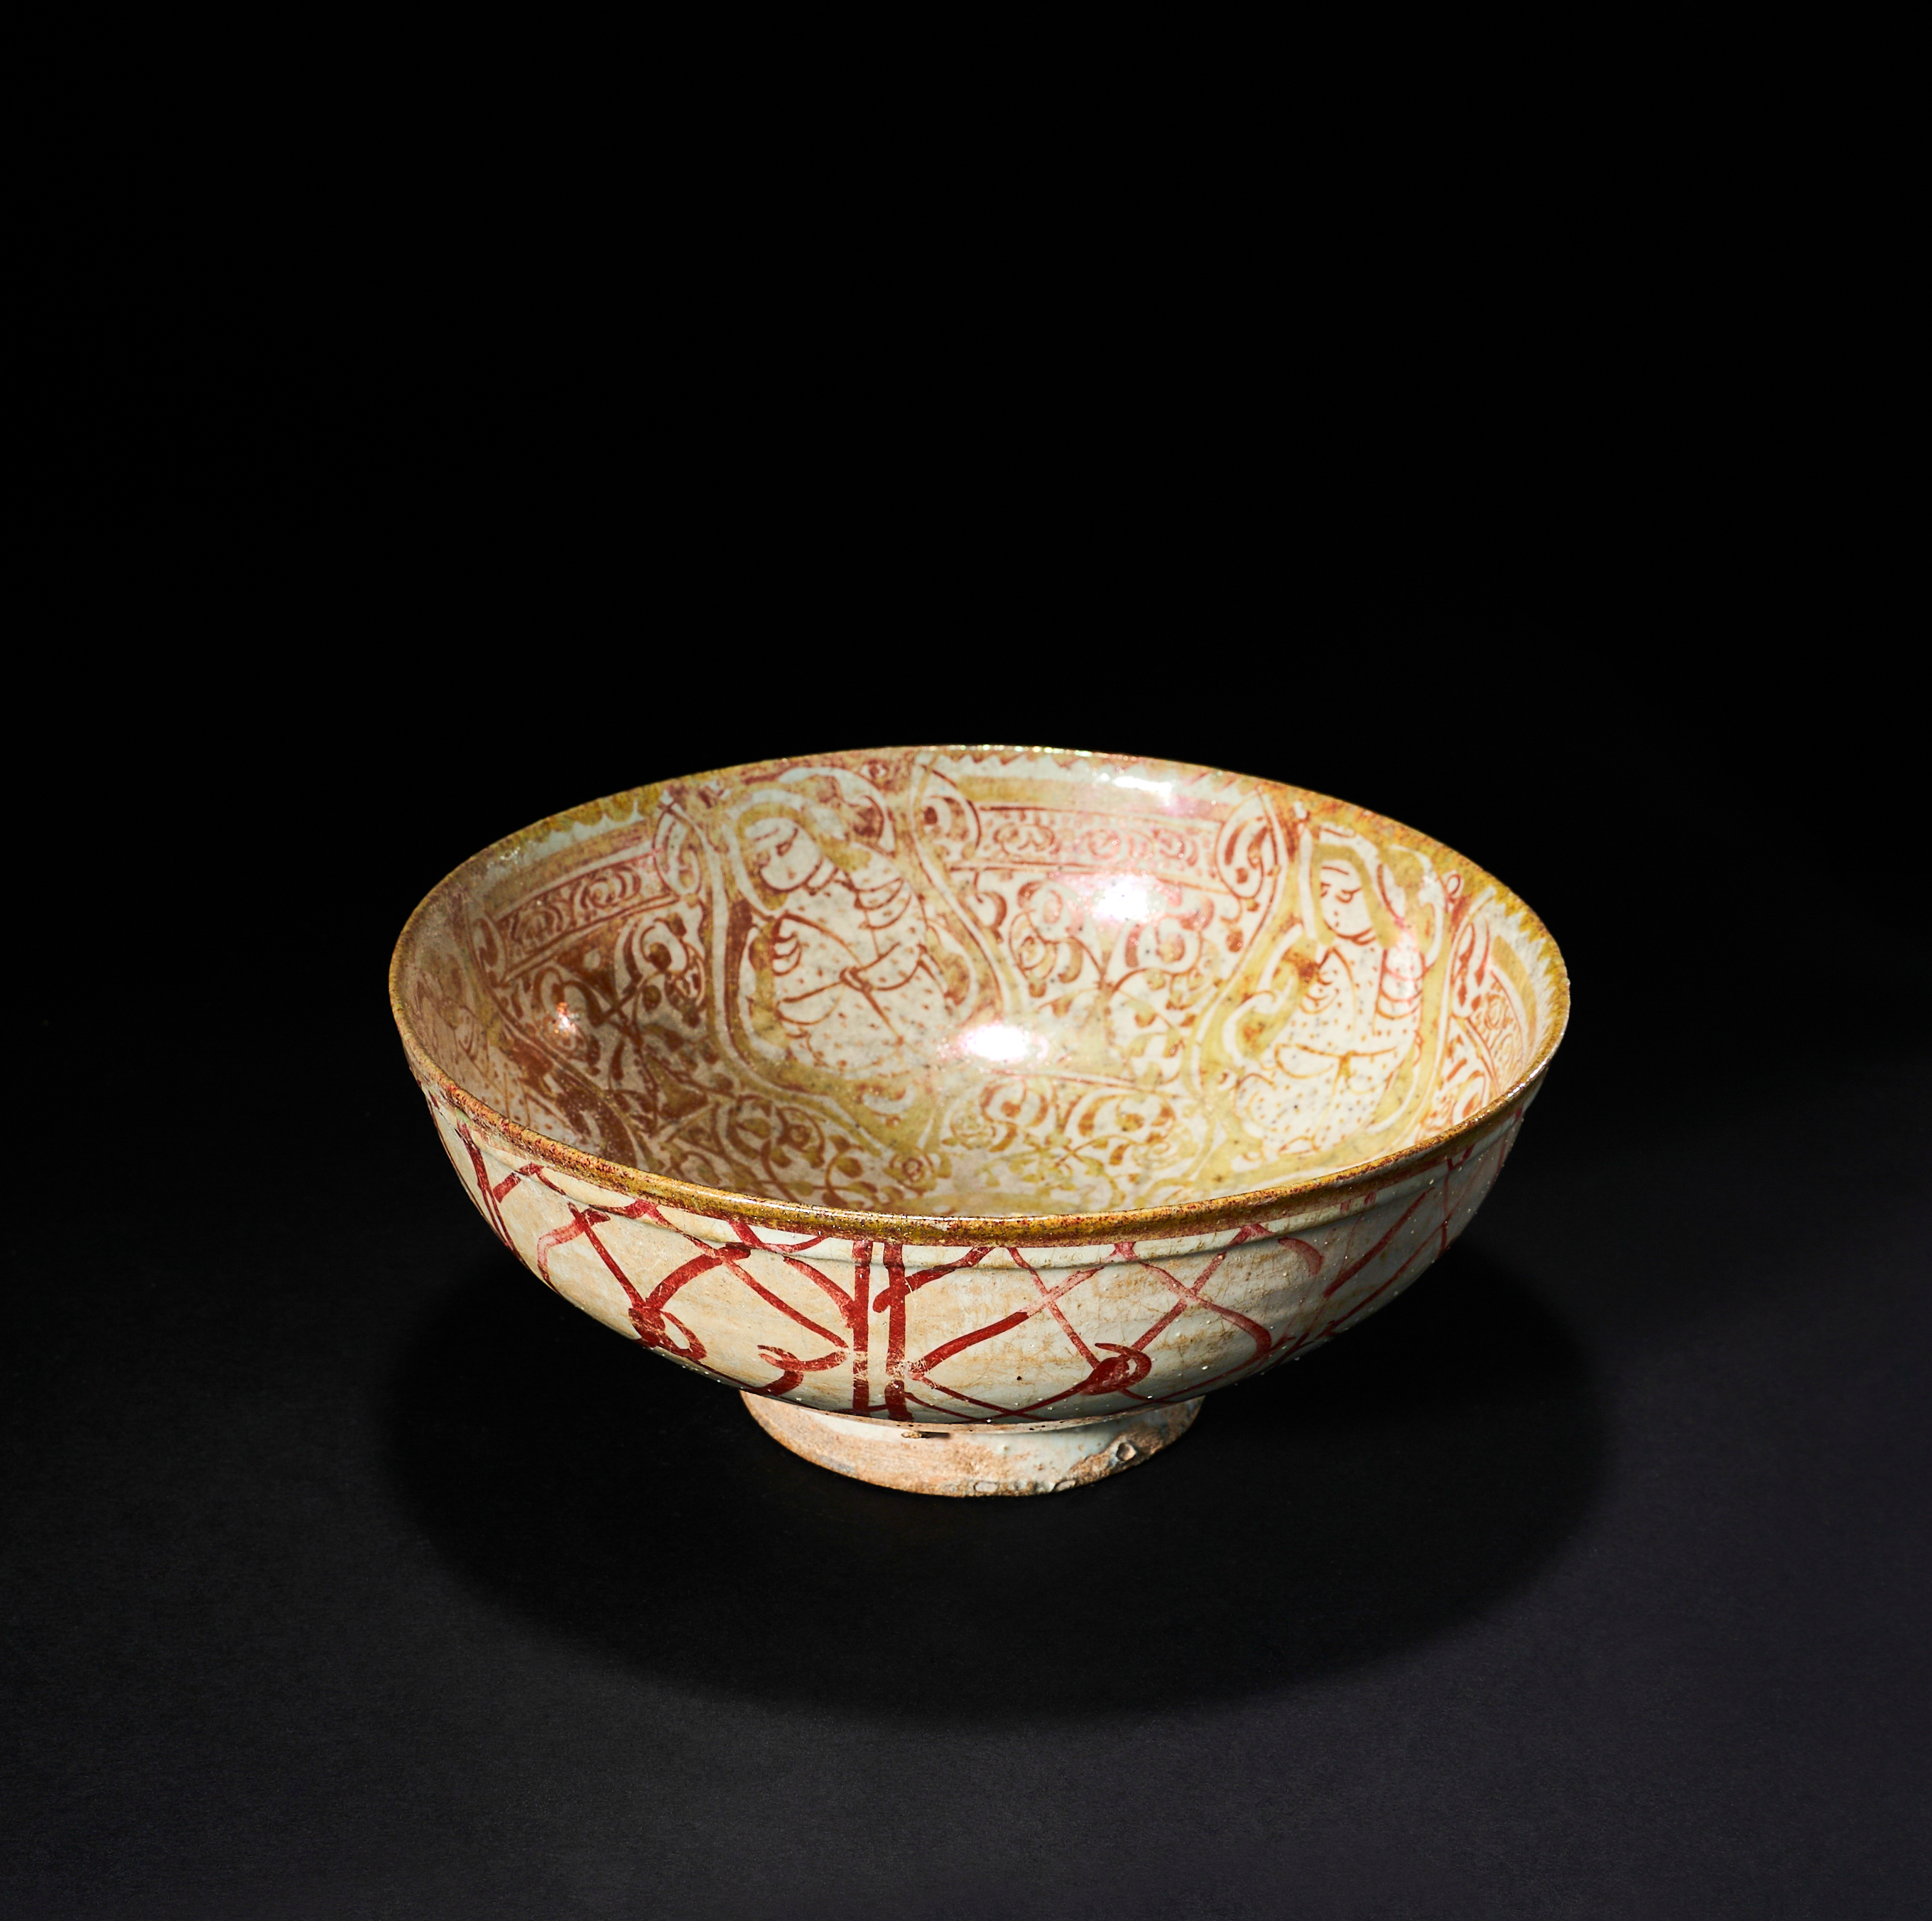 AN ABBASID LUSTRE POTTERY BOWL PROBABLY CENTRAL ASIA, 9TH/10TH CENTURY - Image 2 of 3